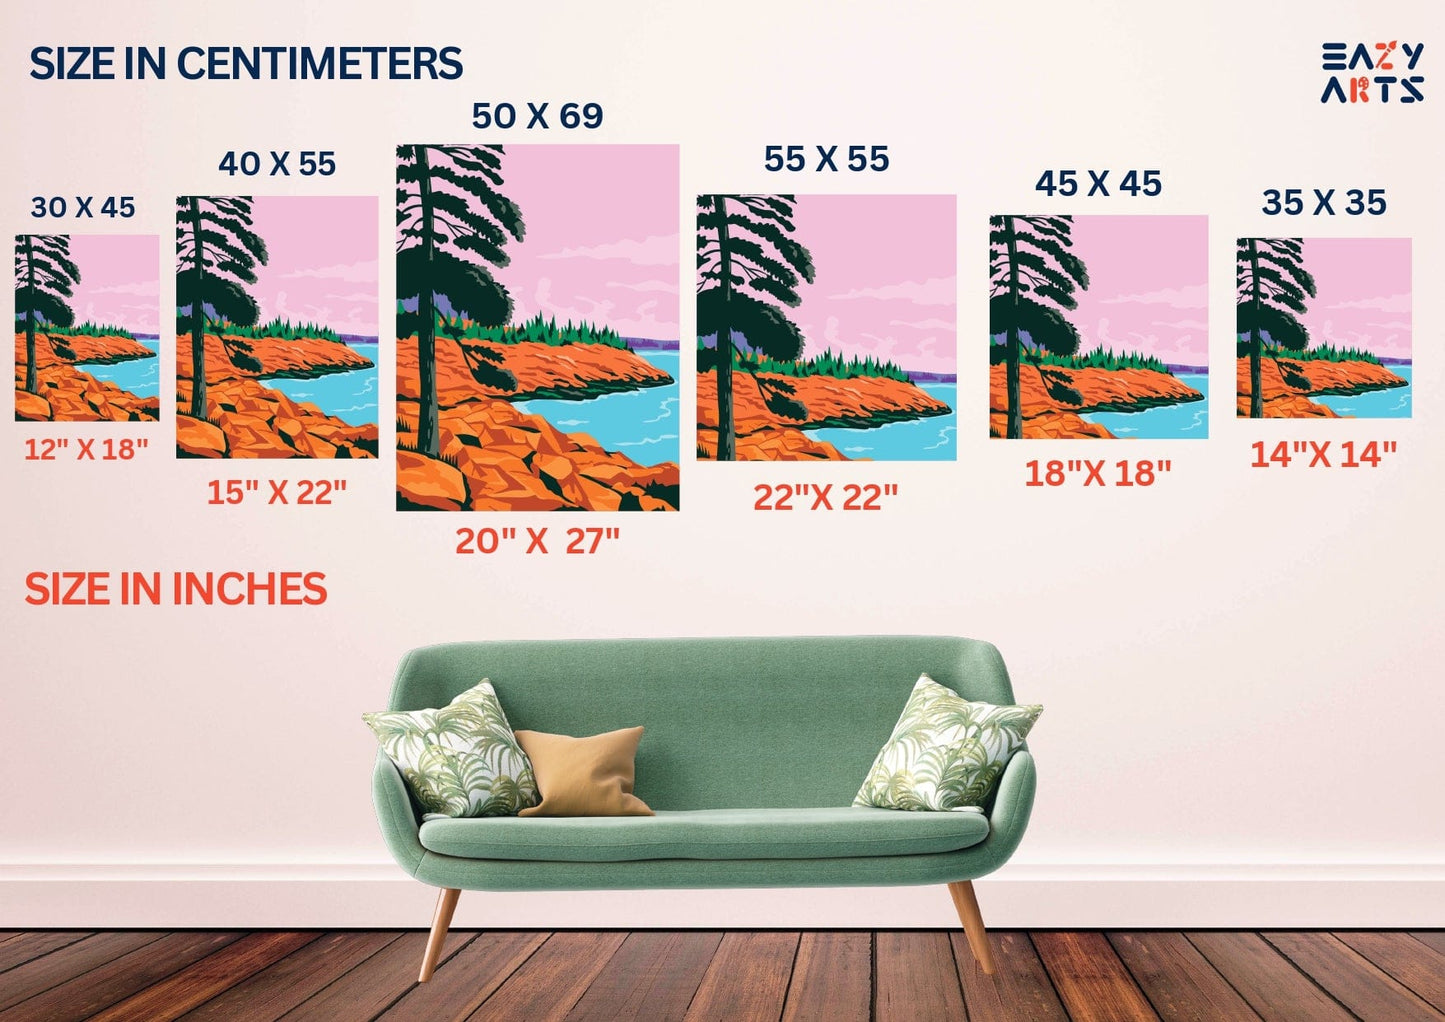 Eazy arts size chart for paint by numbers kit for adults